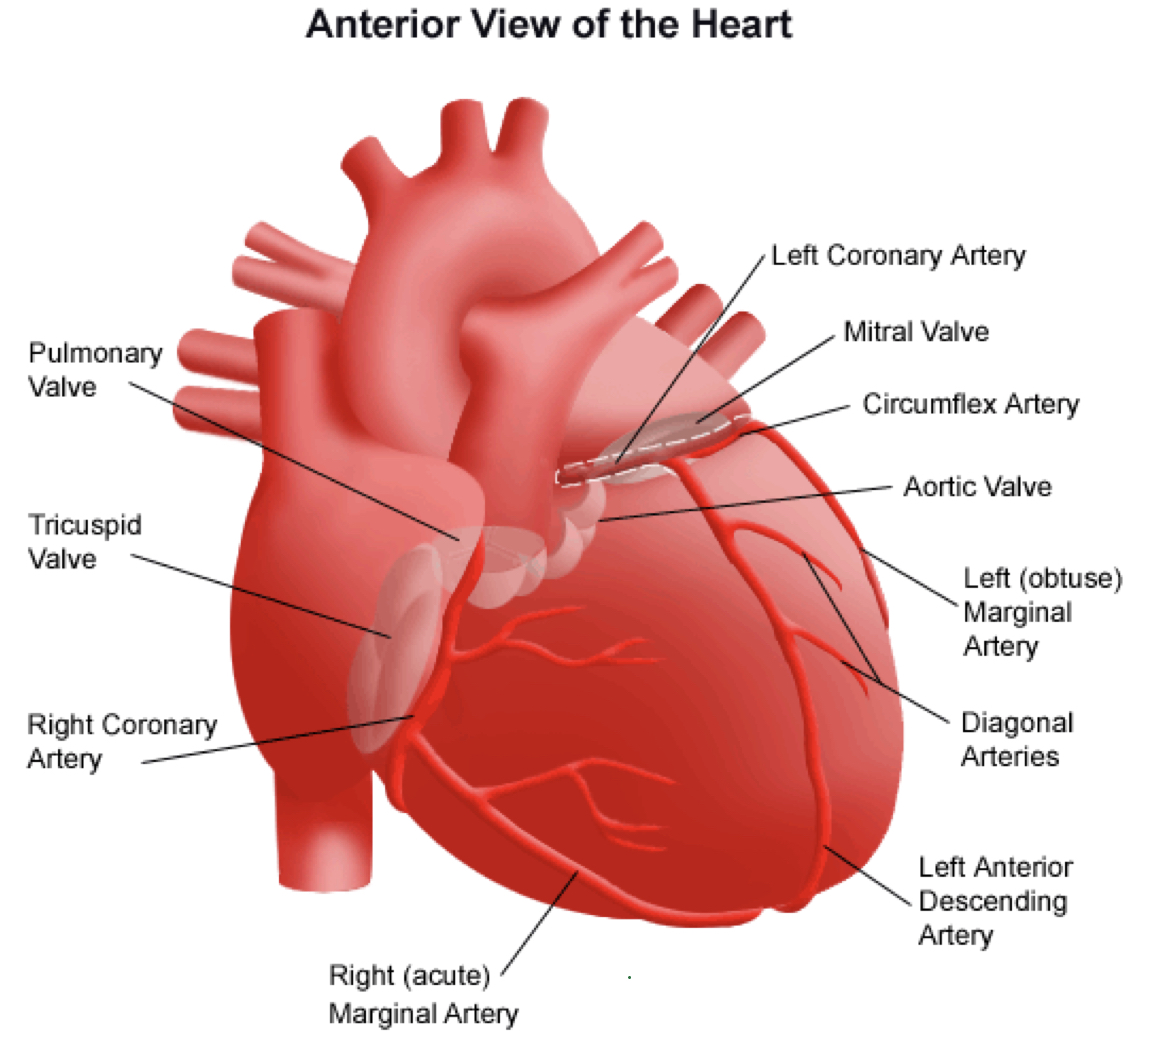 <ul><li><p>arteries that carry blood AWAY from the heart</p></li><li><p>veins that carry blood TO the heart</p></li><li><p>2 atria that receive venous blood (blood enters the heart)</p></li><li><p>2 ventricles that eject blood into arteries (blood leaves the heart); right ventricle pumps deoxygenated blood through the pulmonary artery--&gt; lungs and the left ventricle pumps oxygenated blood through the aorta--&gt; rest of the body</p></li></ul>